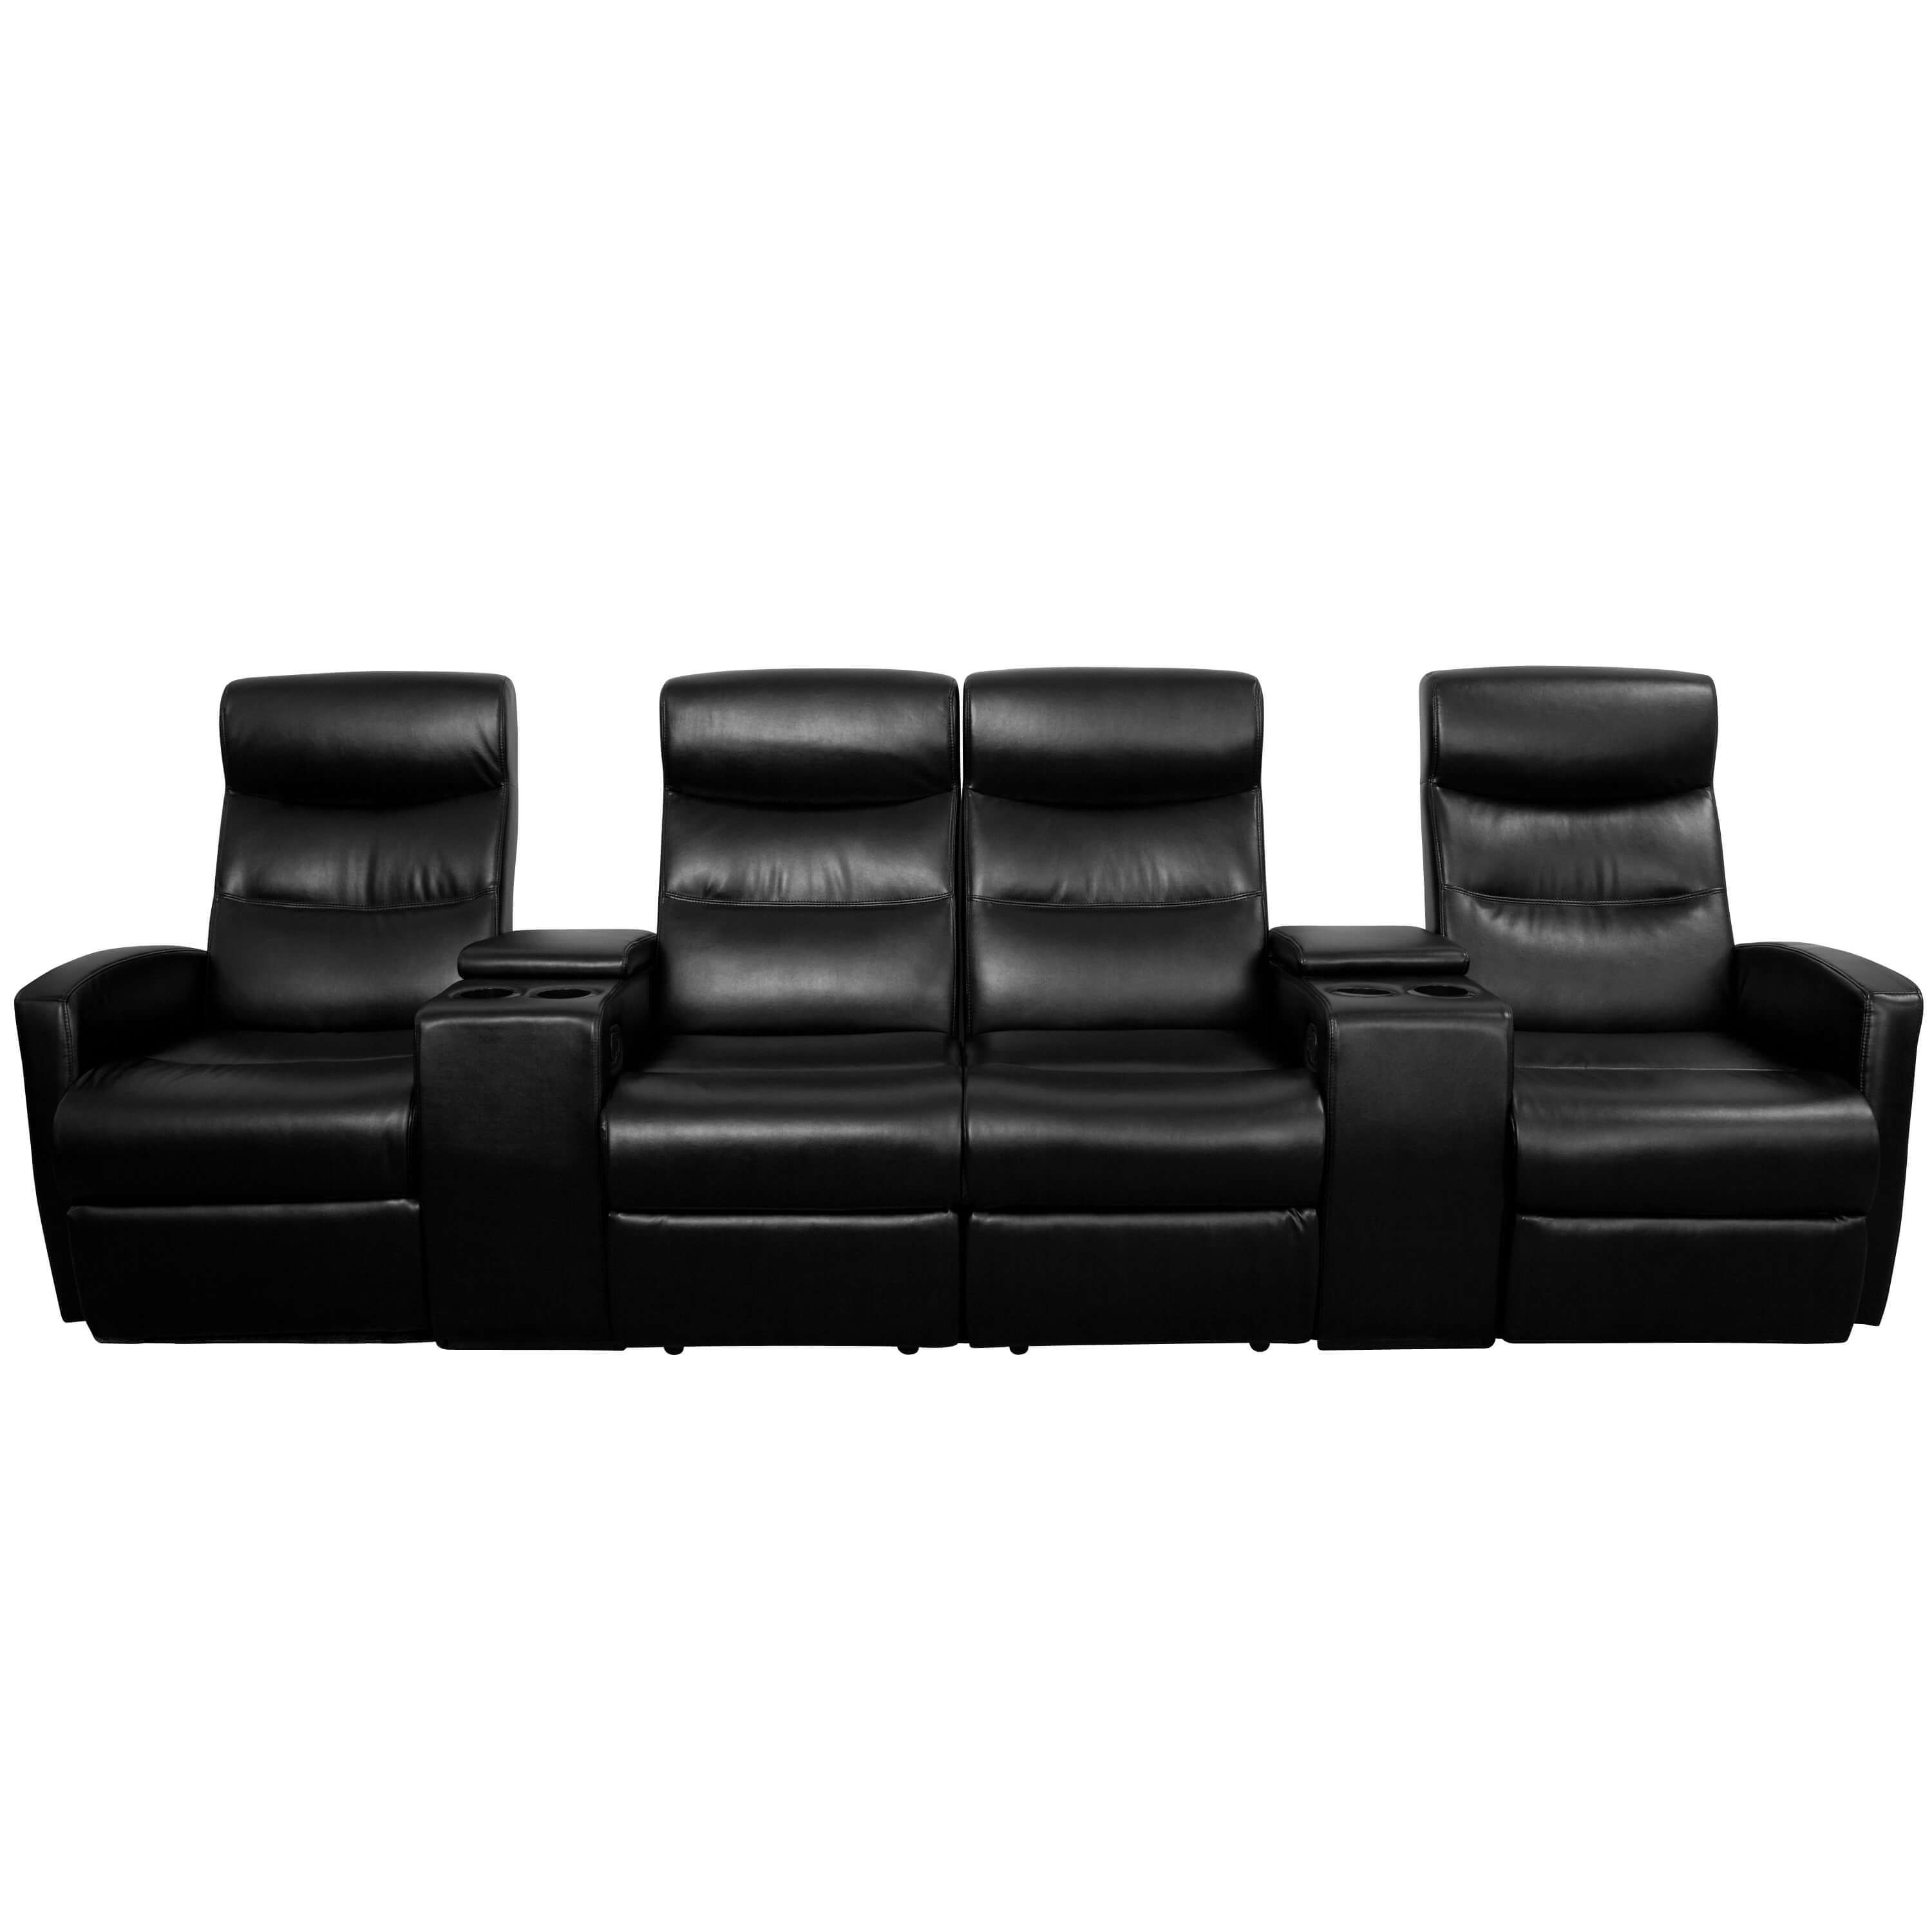 Home theatre seating 4 seater recliner sofa